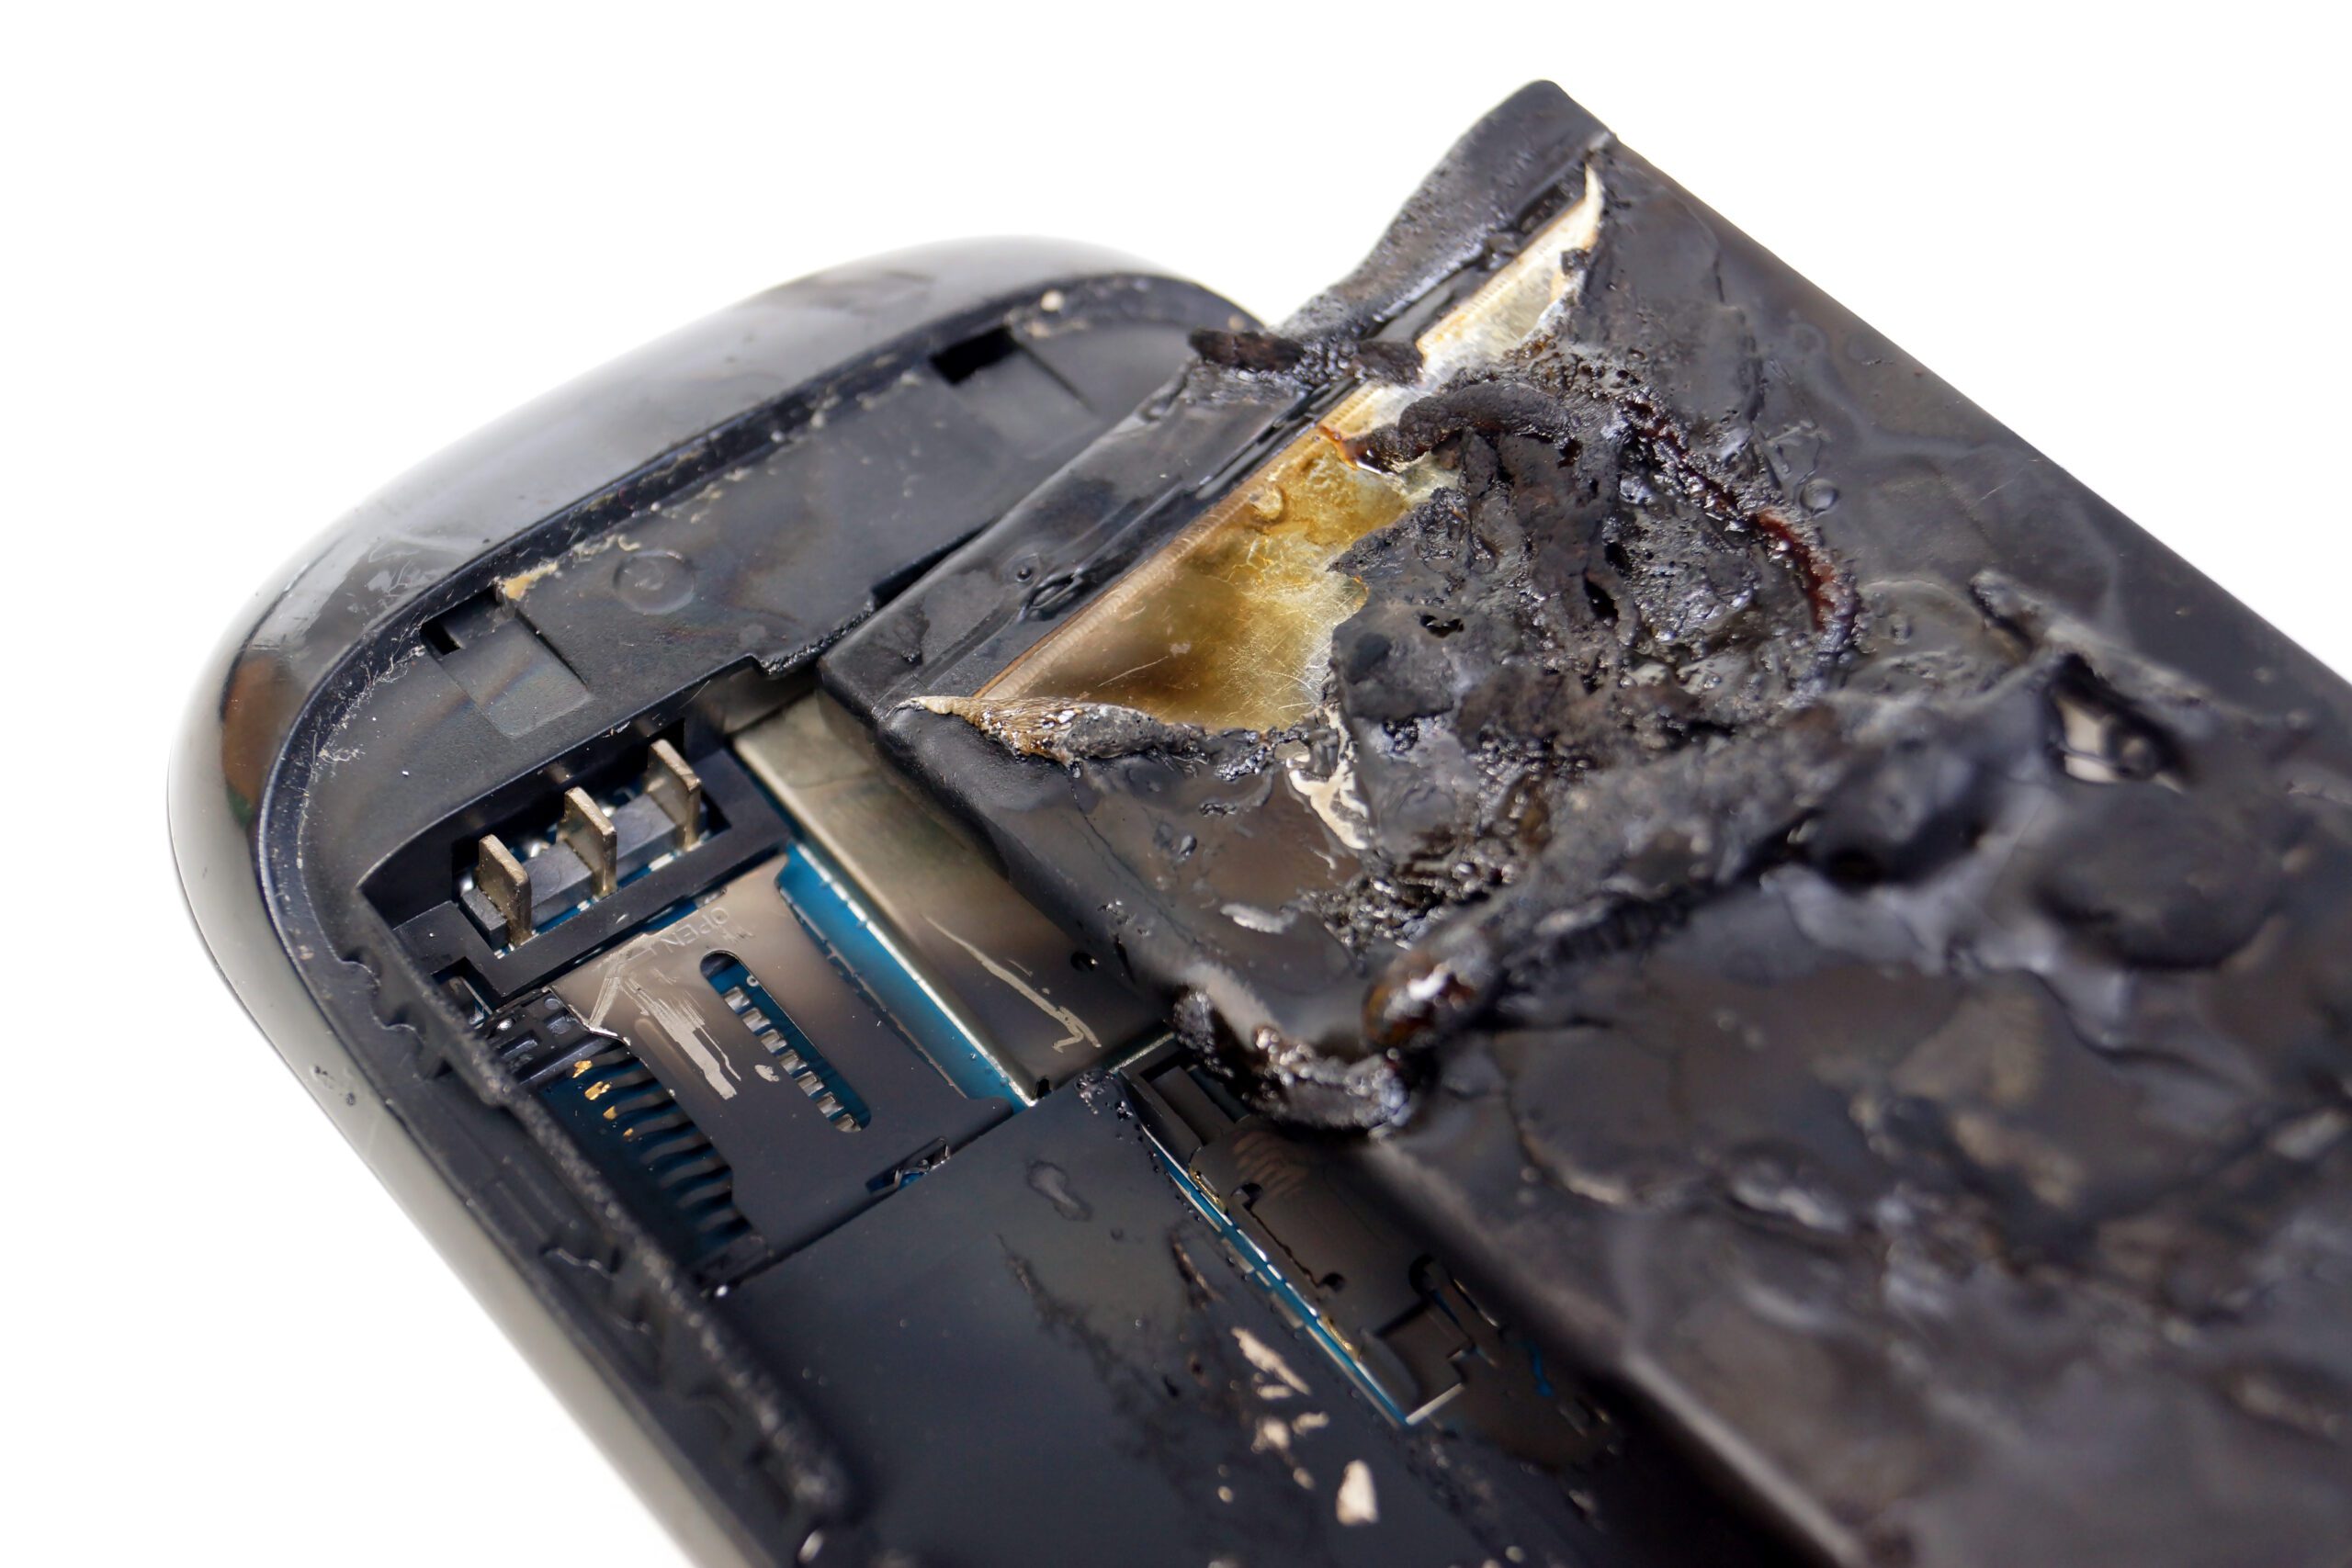 A black cell phone is in pieces, pictured from the back with fire damage.